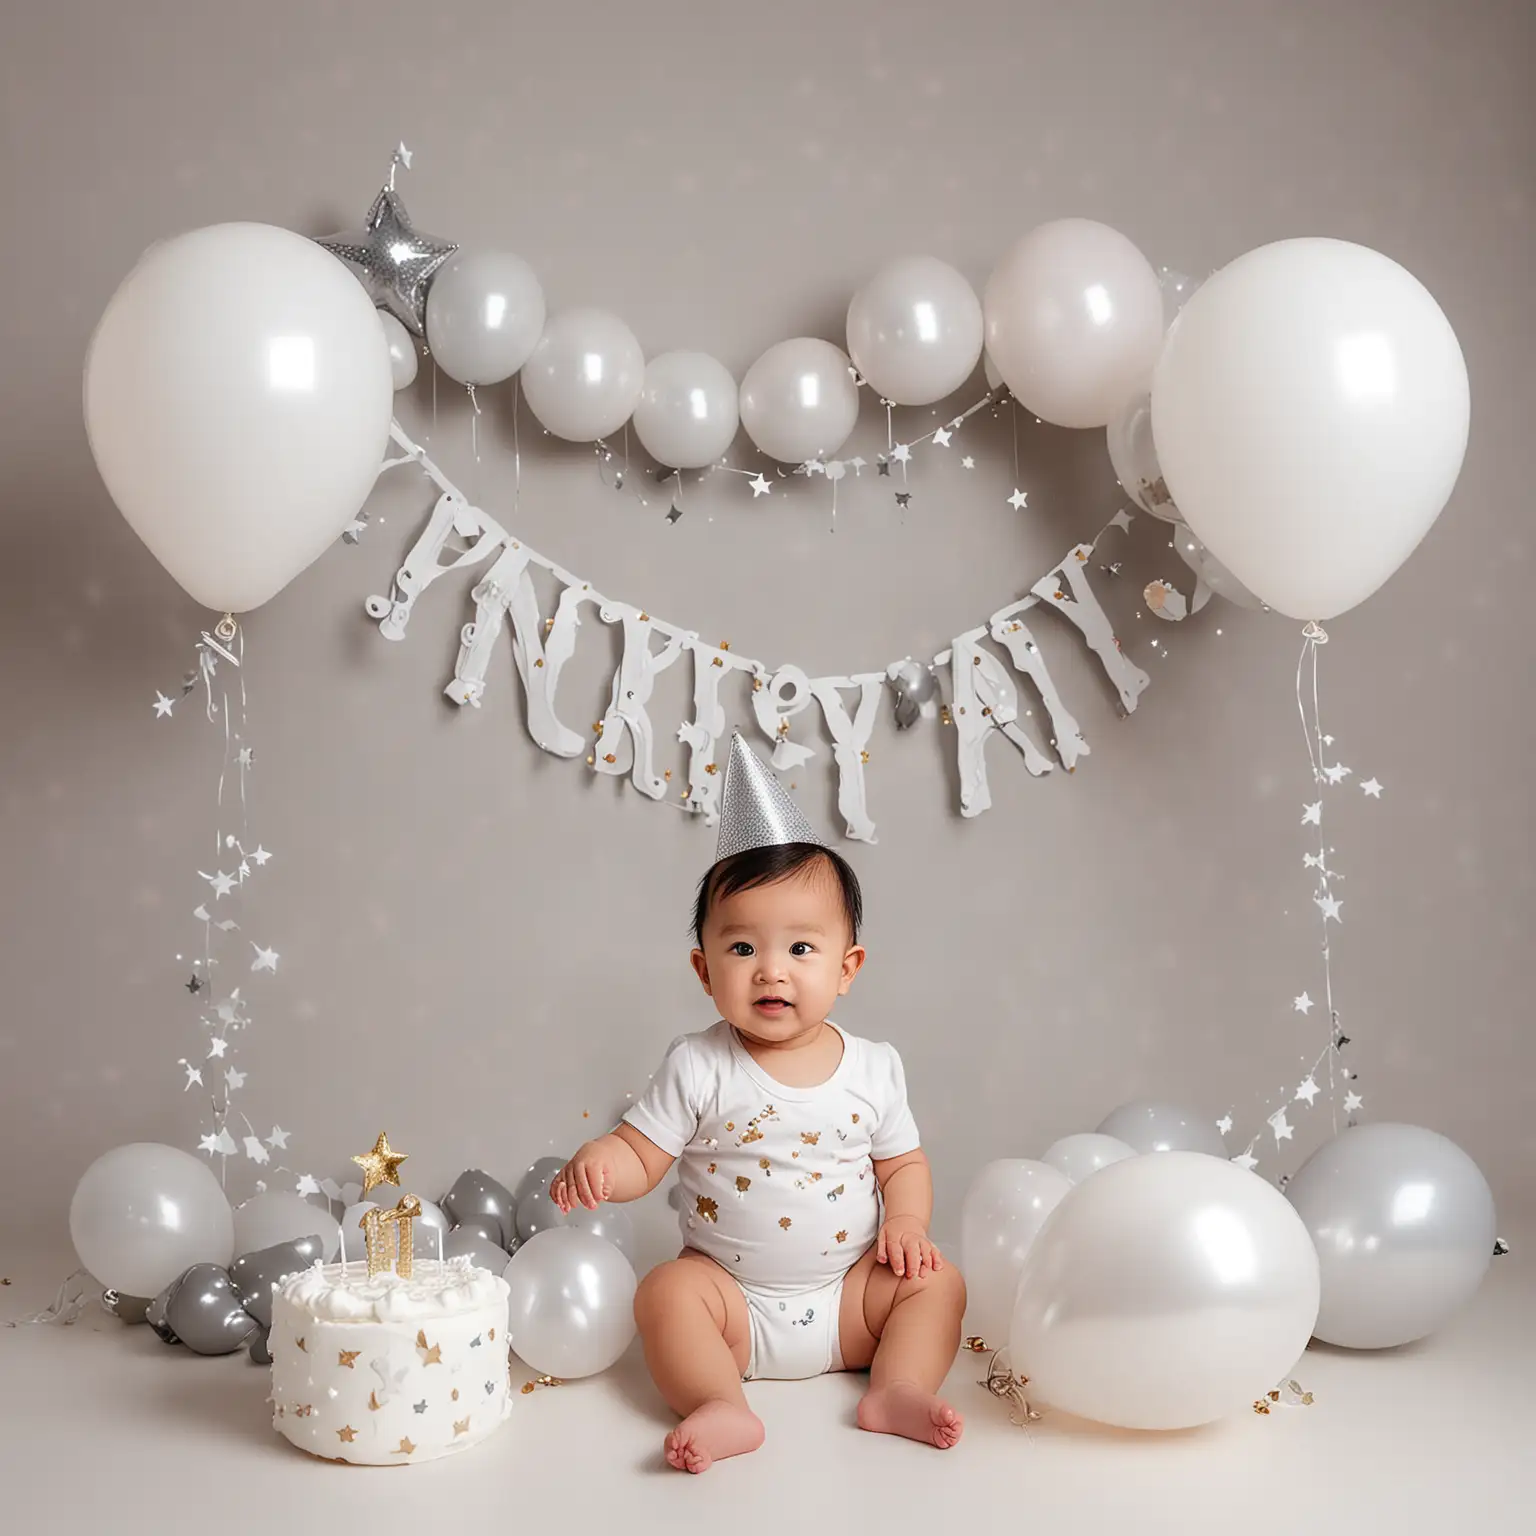 one year old birthday white cake smash photography asian baby with cute clothes simple setups balloon garland backdrop silver baloons with moon and stars led lights and clouds with birthday hat simple minimalist plain background less balloon
